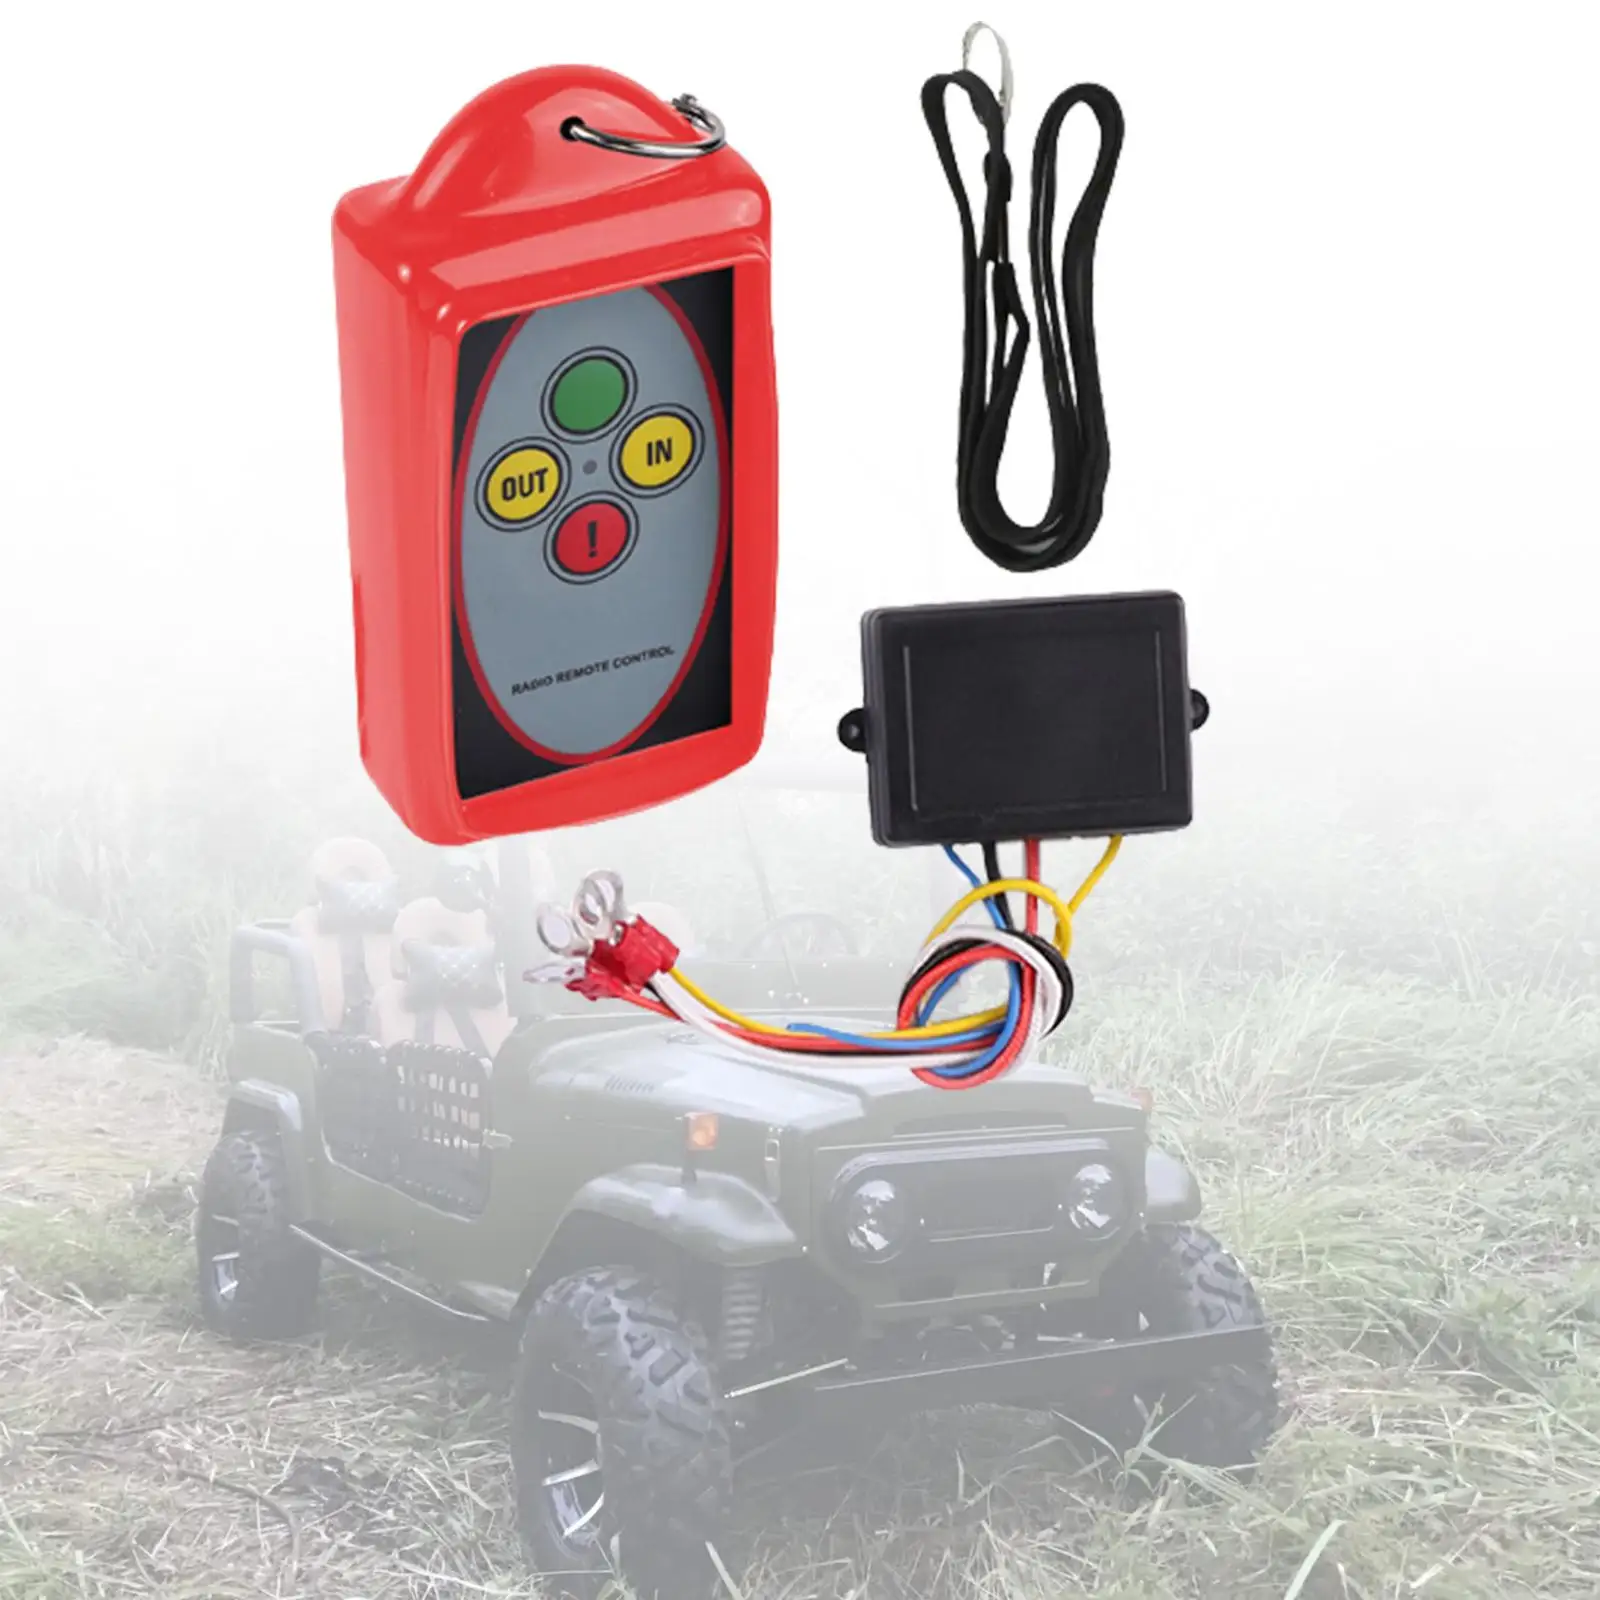 Winch Wireless Remote Control Switch Kit 12V 24V 433MHz Repair Remote Receiver Kit Replacement Vehicle UTV Trailer Car